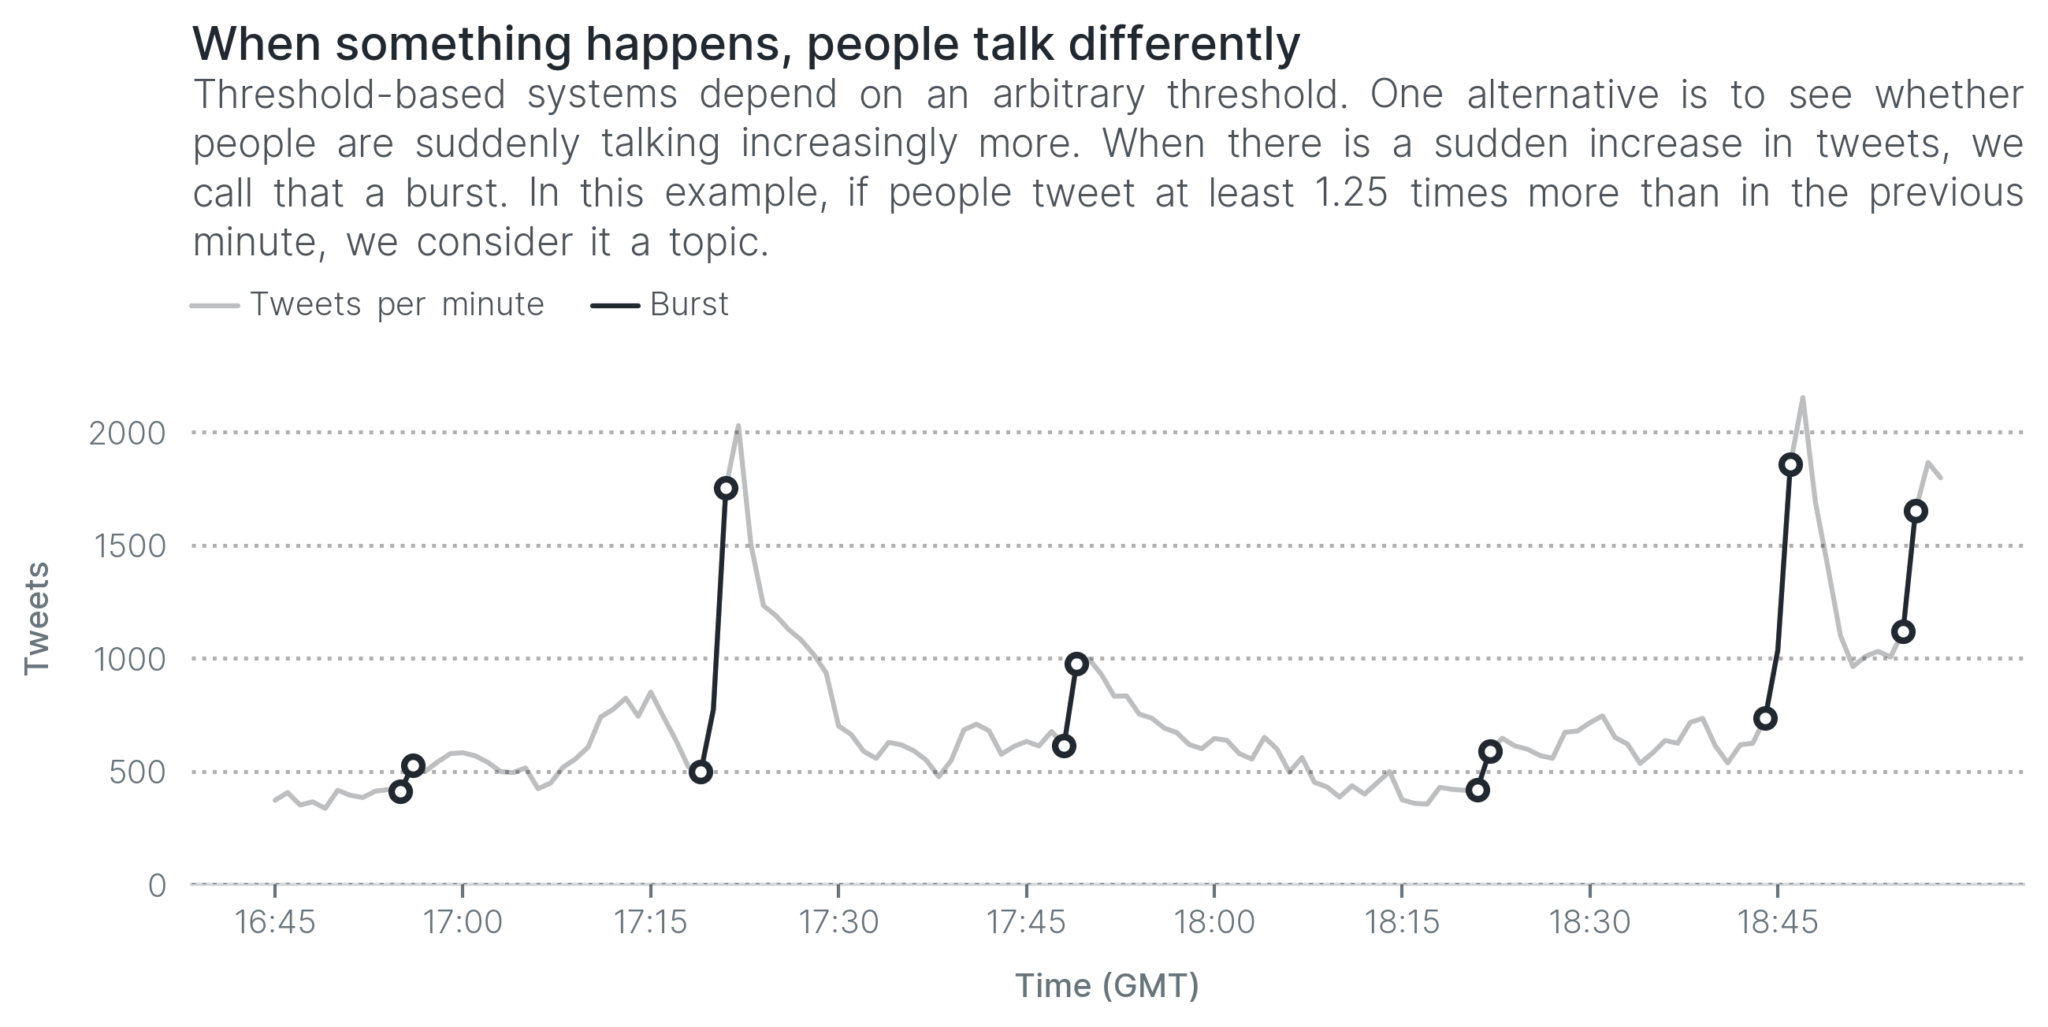 Spikes indicate that people started talking at the same time, indicating that something must have happened.